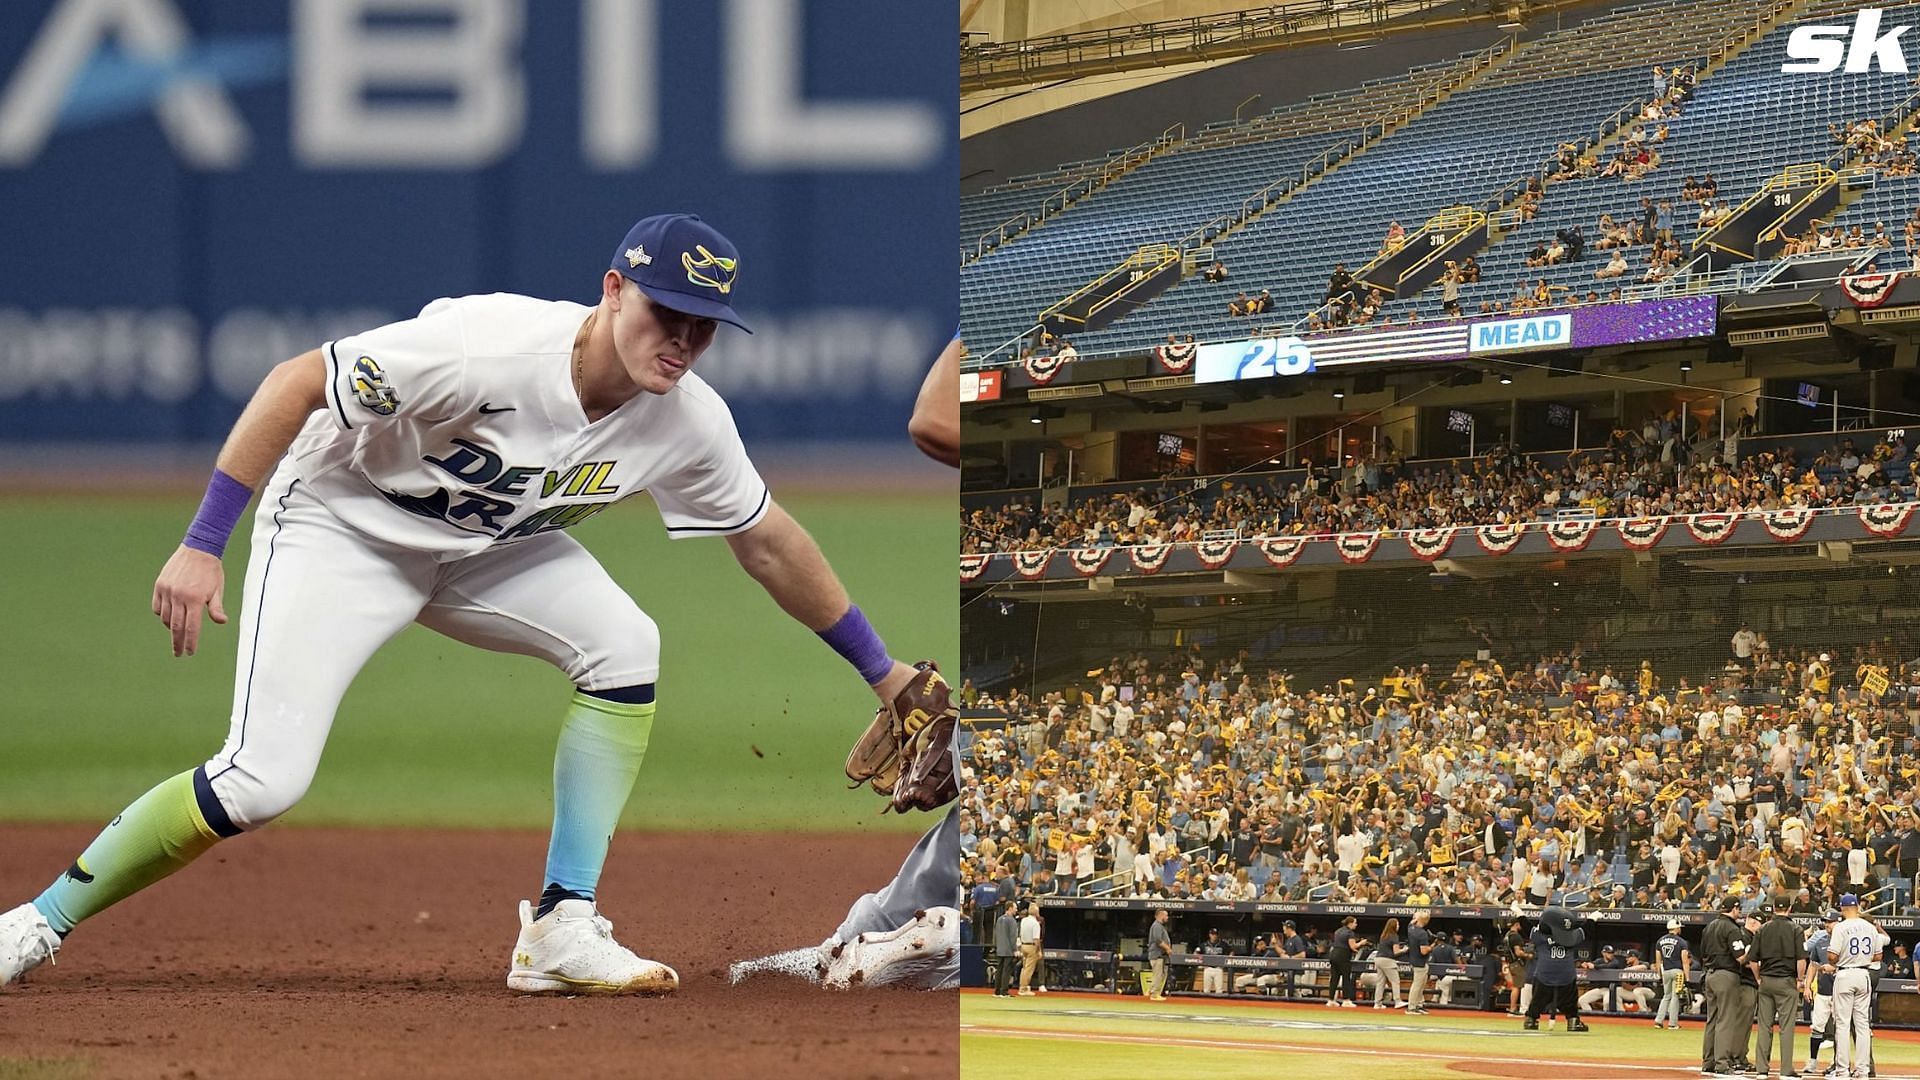 Curtis Mead of the Tampa Bay Rays and an image of Tropicana Field during Game 2 of the AL Wild Card Series